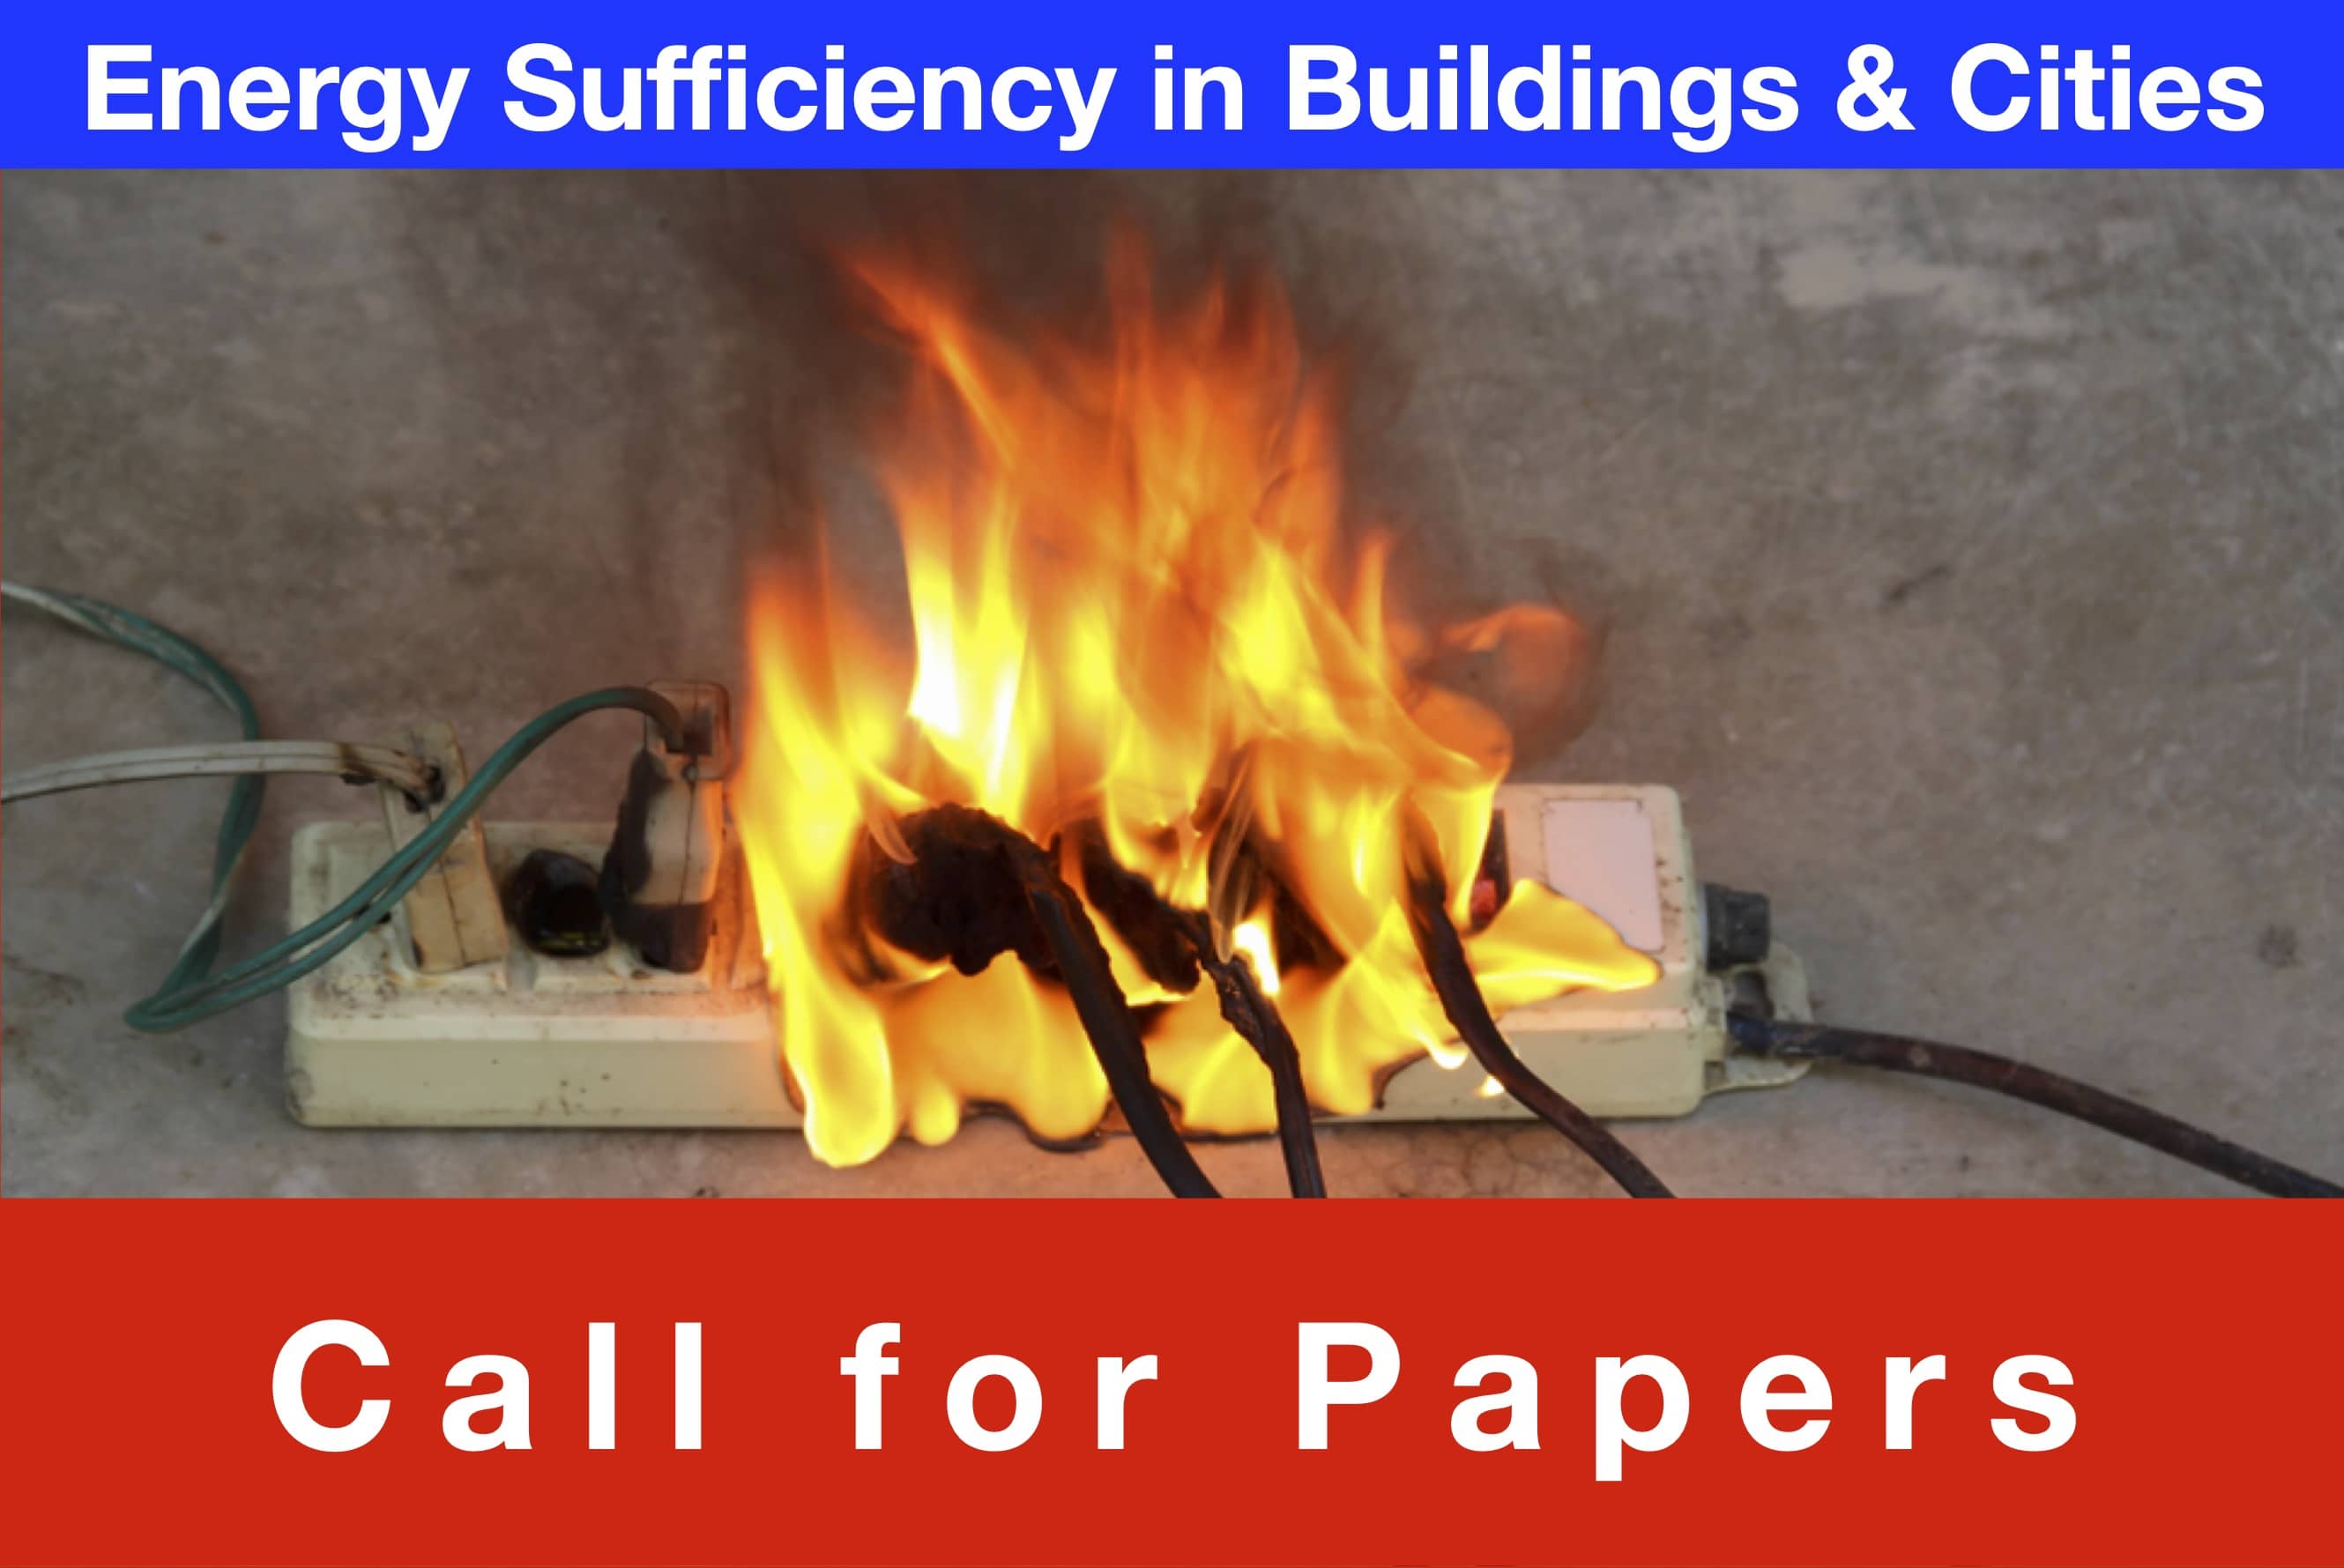 Energy Sufficiency in Buildings and Cities